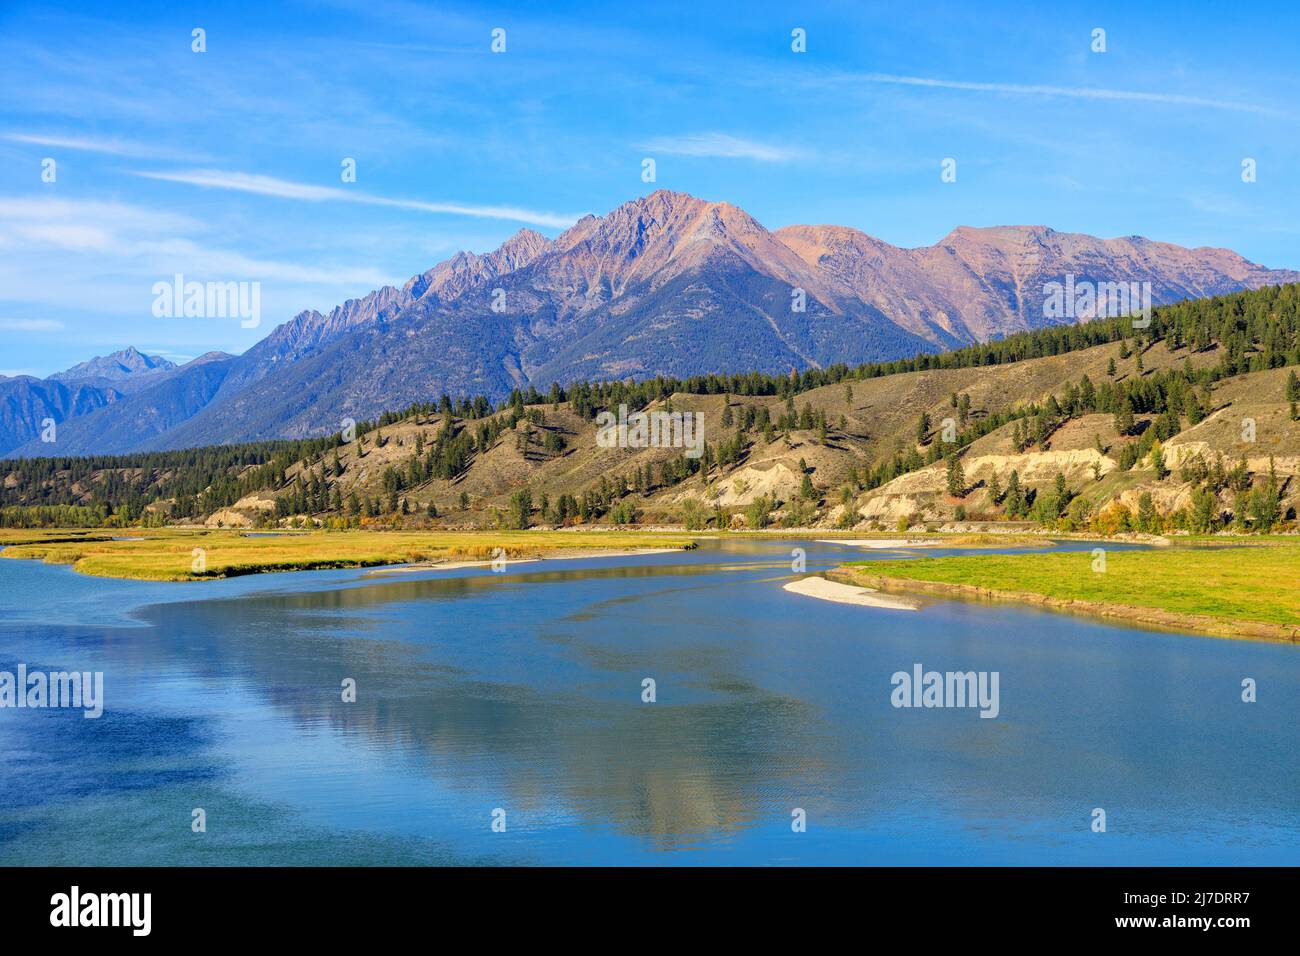 Landscape view of The Steeples in the Canadian Rockies with the Bull River in the East Kootenay near Cranbrook, British Columbia, Canada Stock Photo